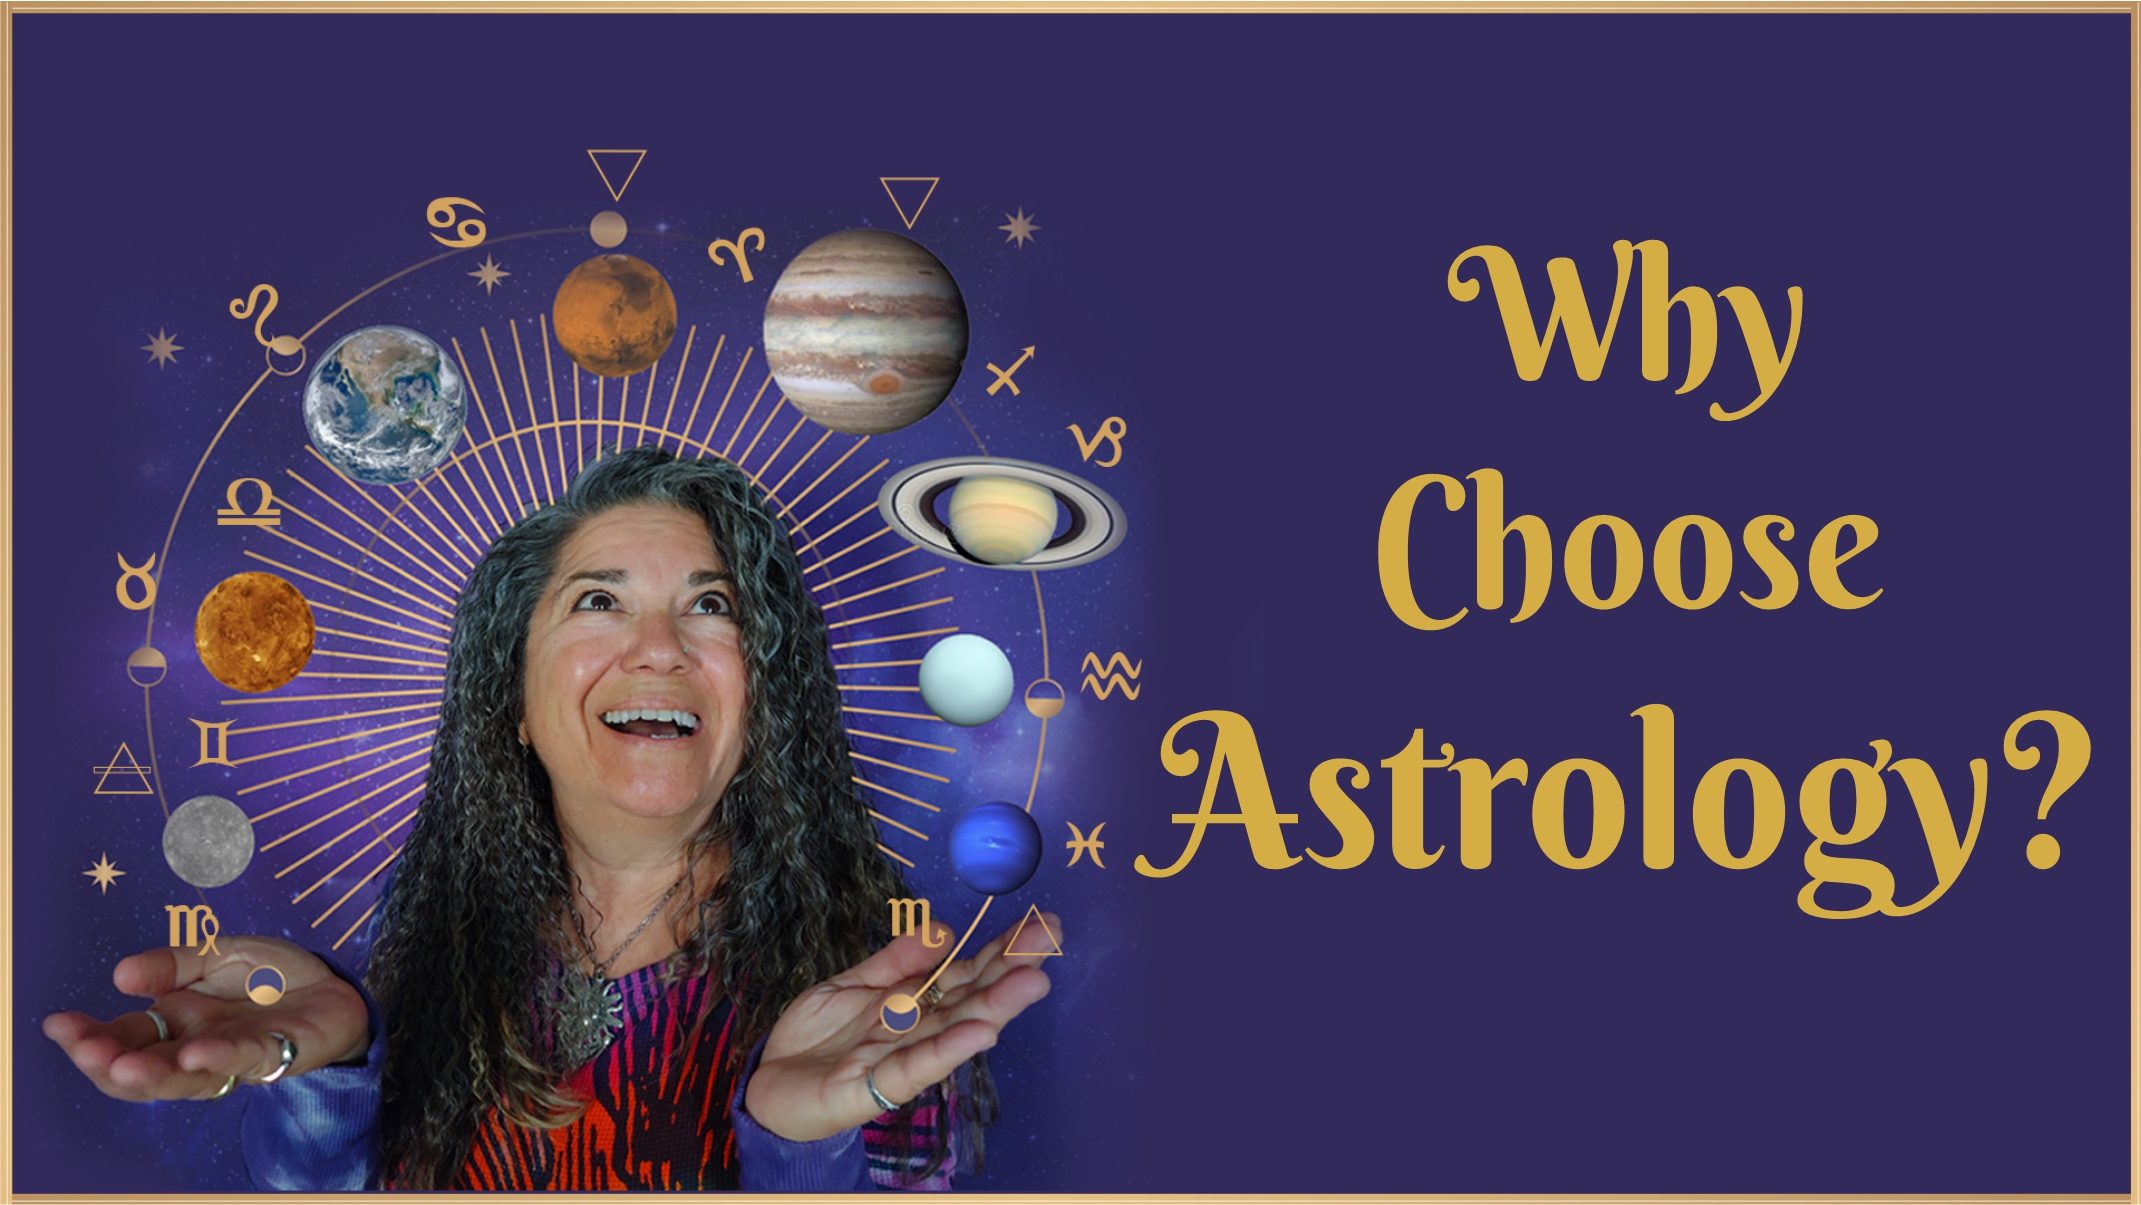 Why Choose Astrology?